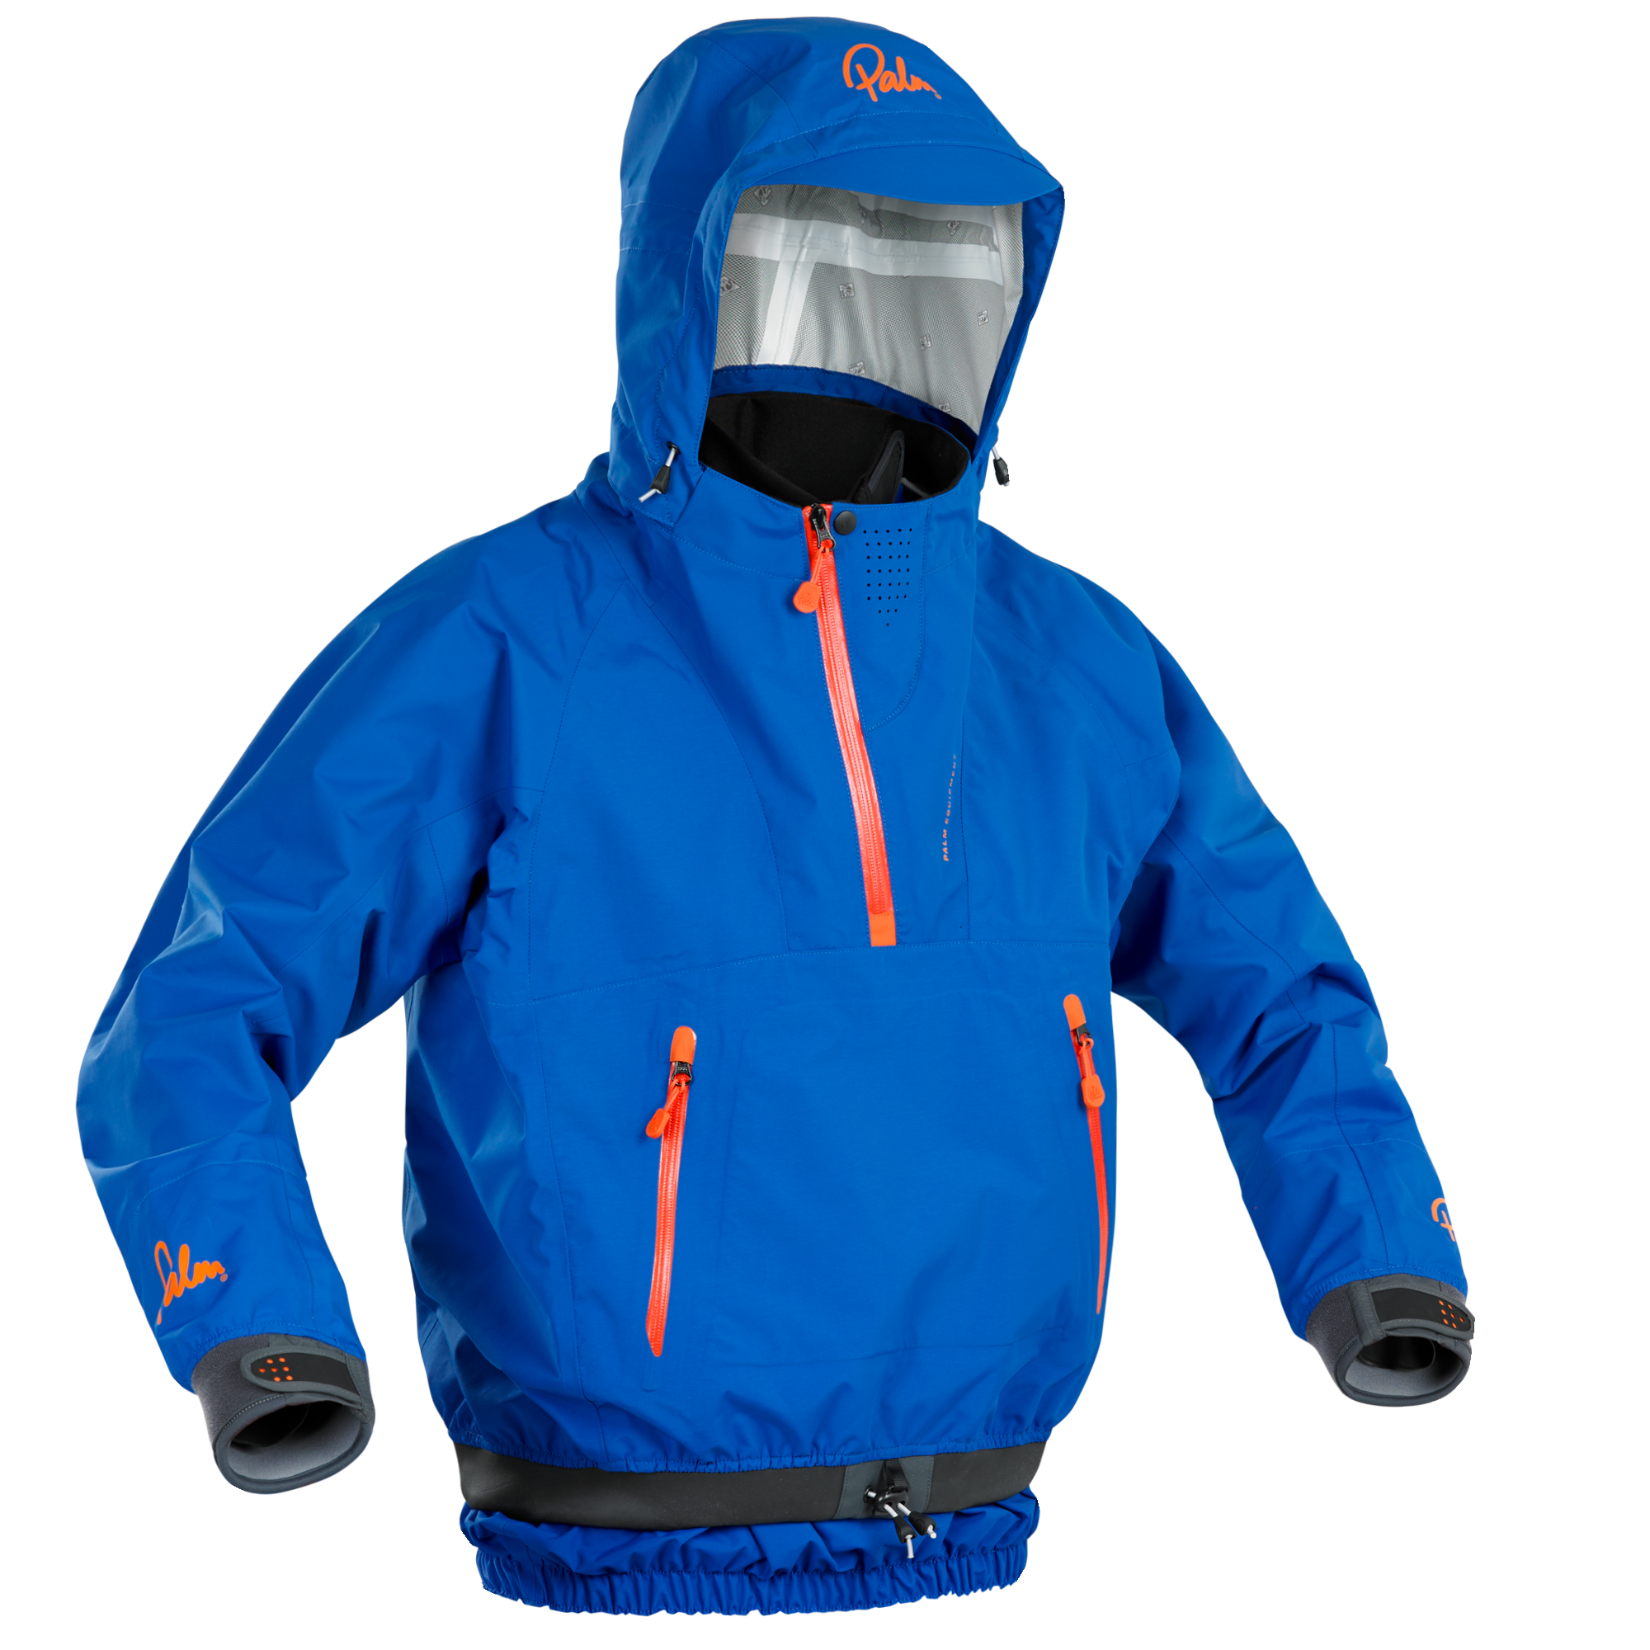 Palm Chinook Hooded Touring Jacket for Sea Kayaking and Touring